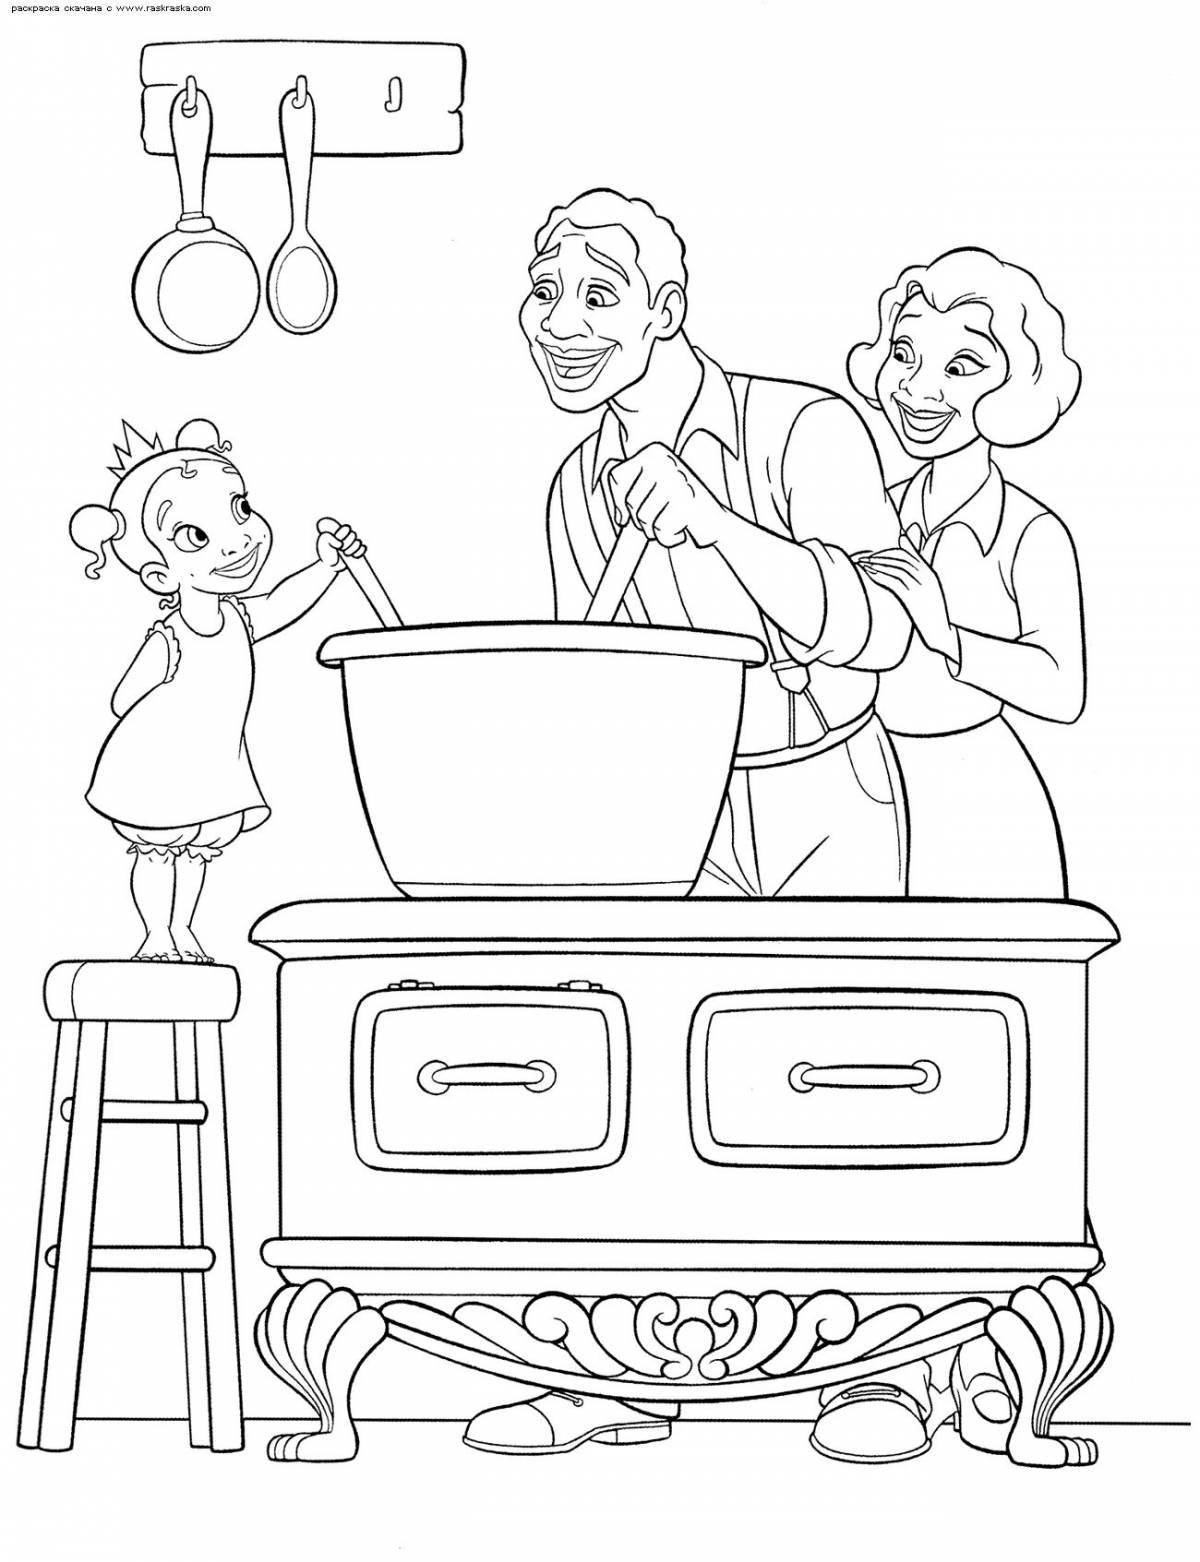 Exciting coloring book to help parents